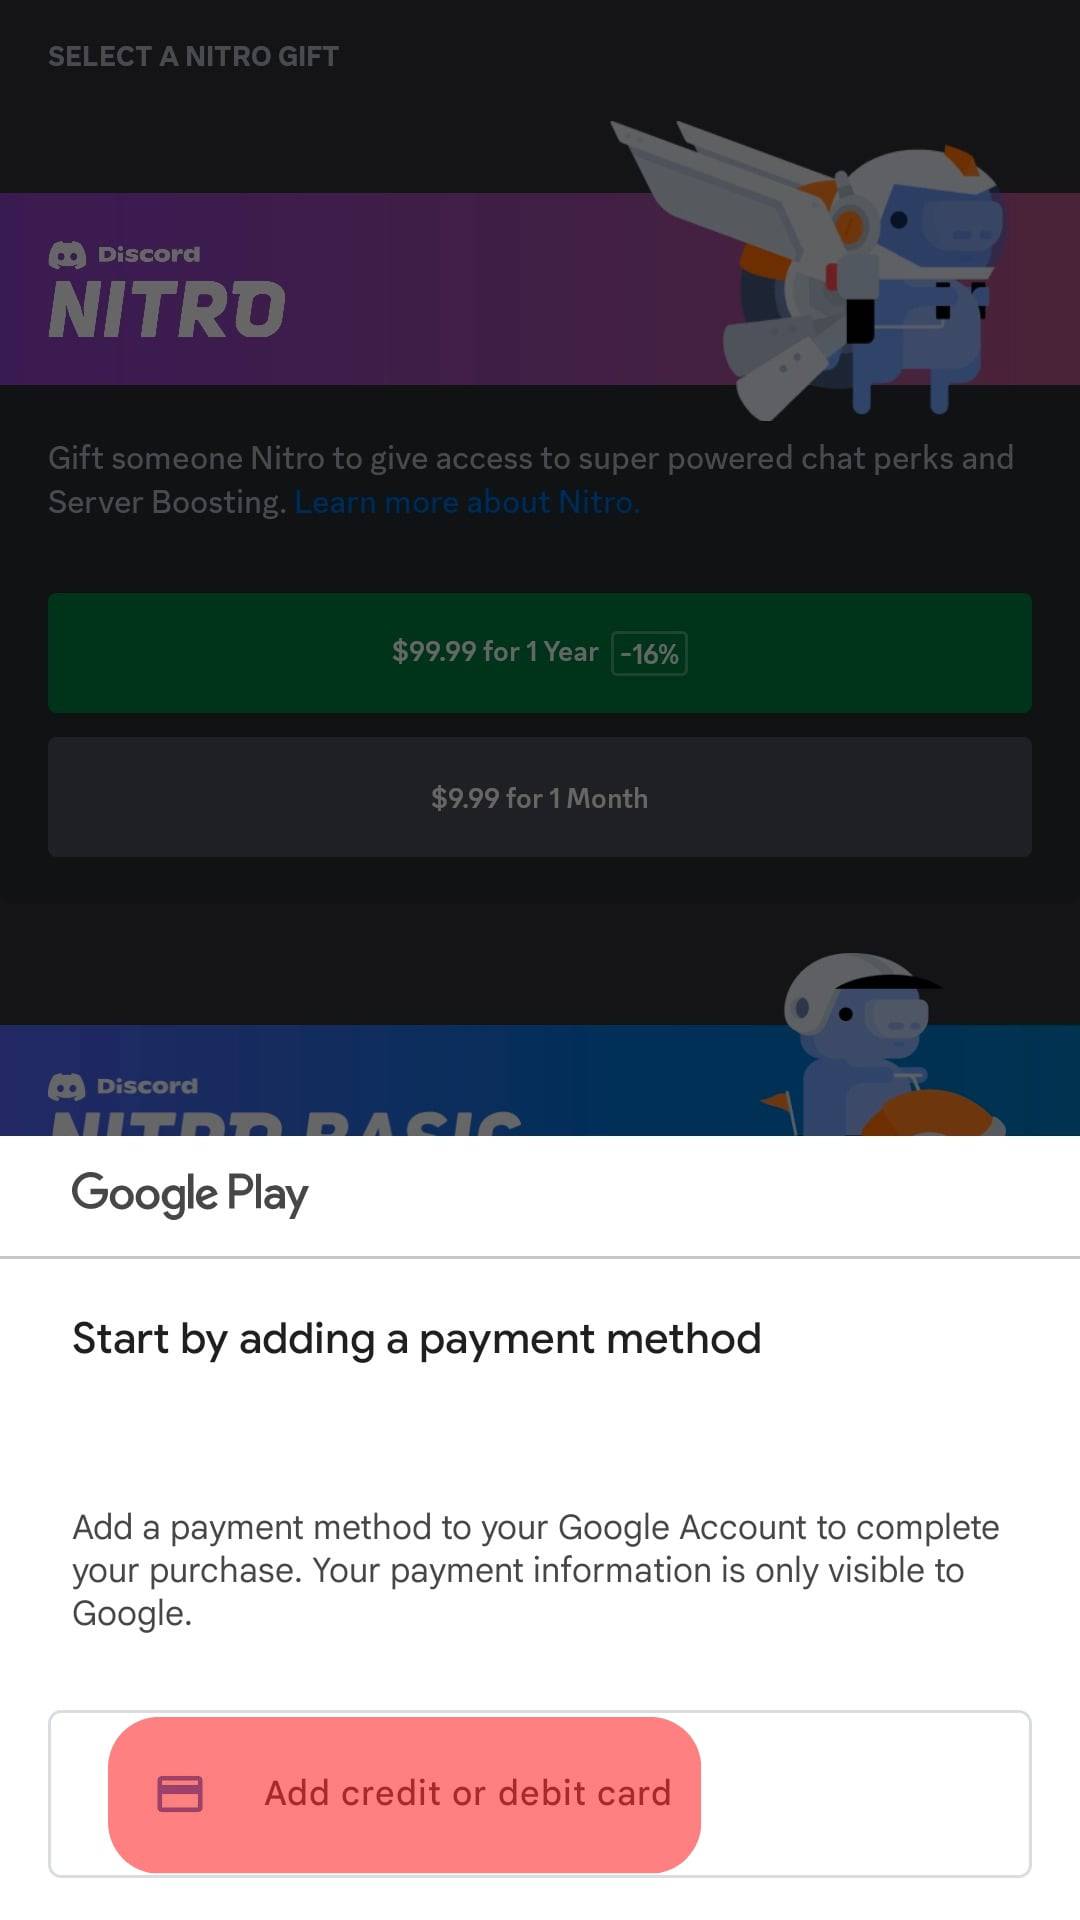 Add Your Payment Method